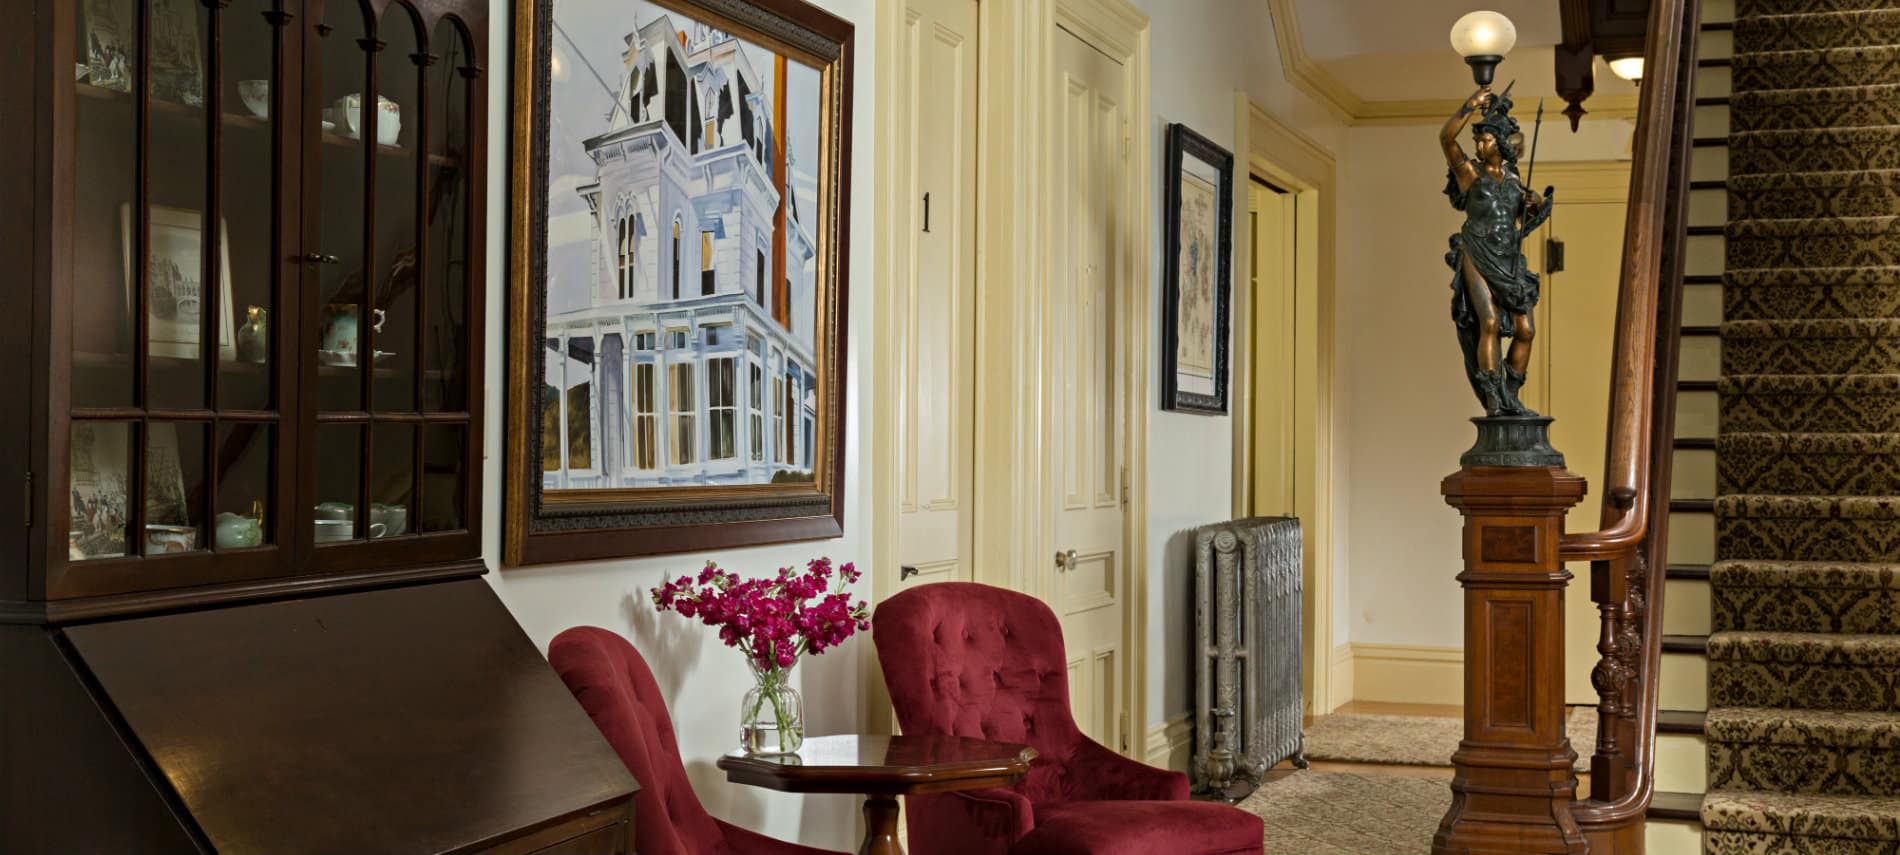 Foyer area with two ruby velvet chairs and a tall staircase rising to the second floor.